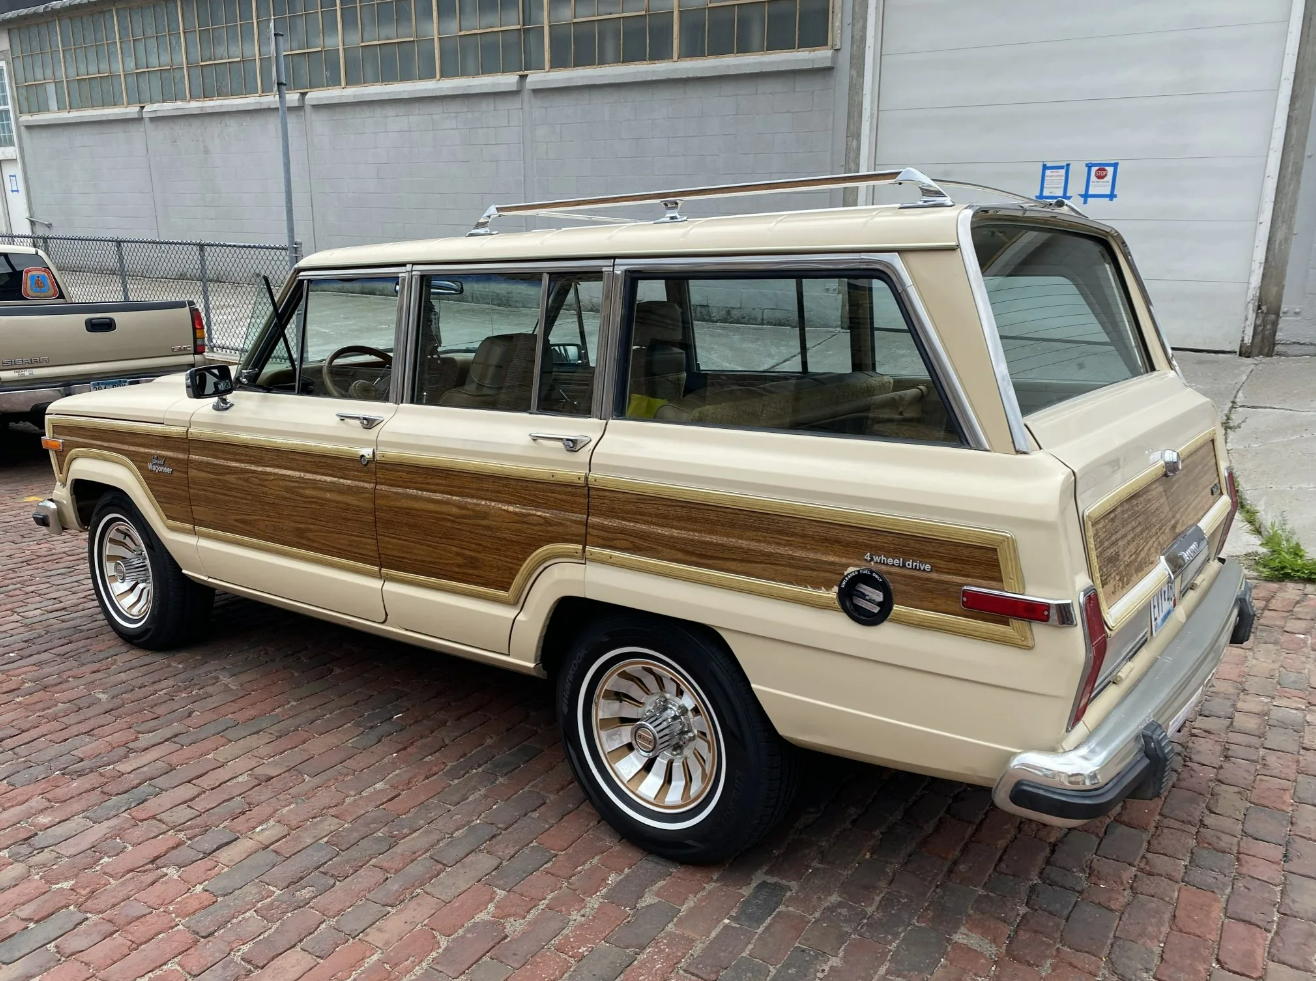 2022-06-27 10_42_16-1985 Jeep Grand Wagoneer for sale on BaT Auctions - closed on March 2, 2021 (Lot.png